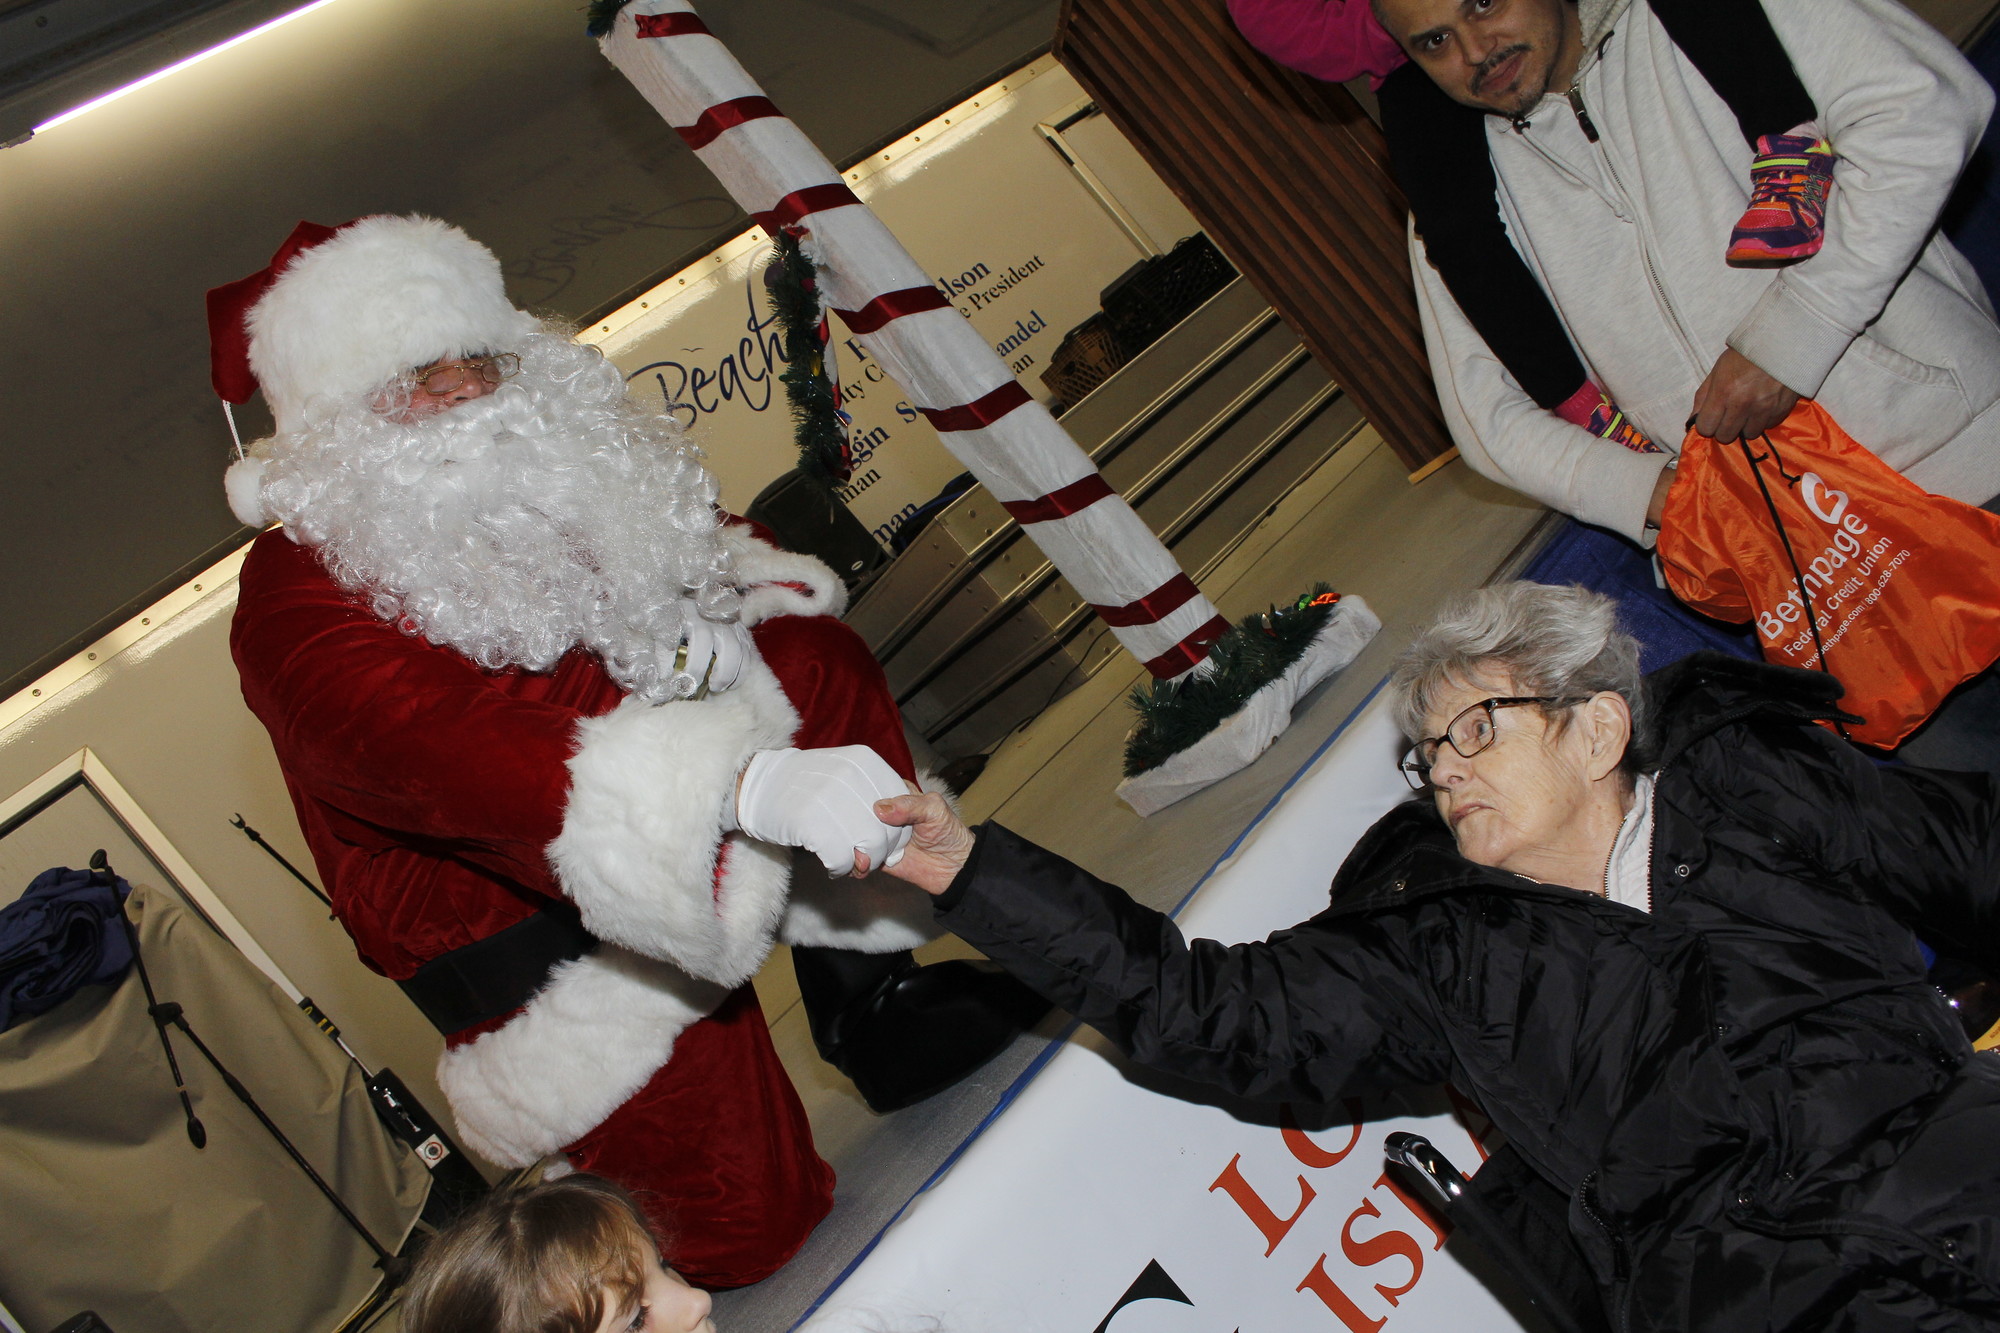 Santa’s oldest fan, Veronica Gagliardi, 93, reached up to shake his hand.